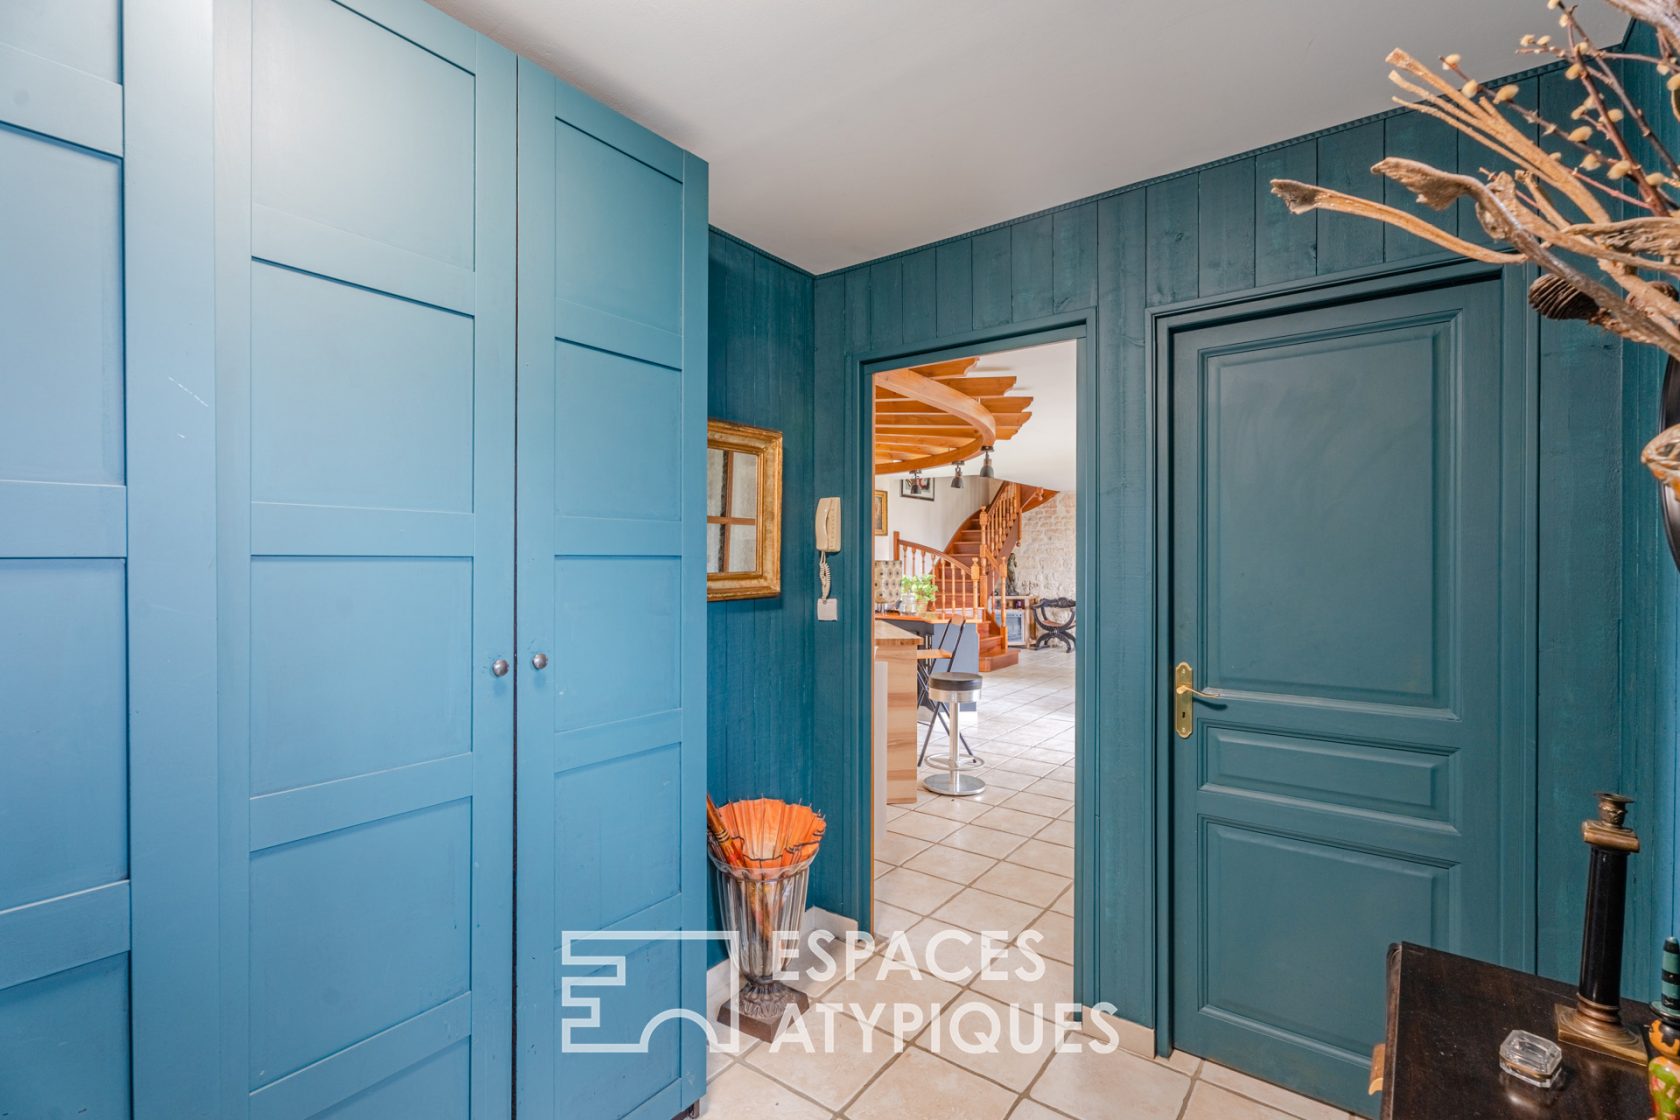 Charming renovated property and guest rooms near Valognes